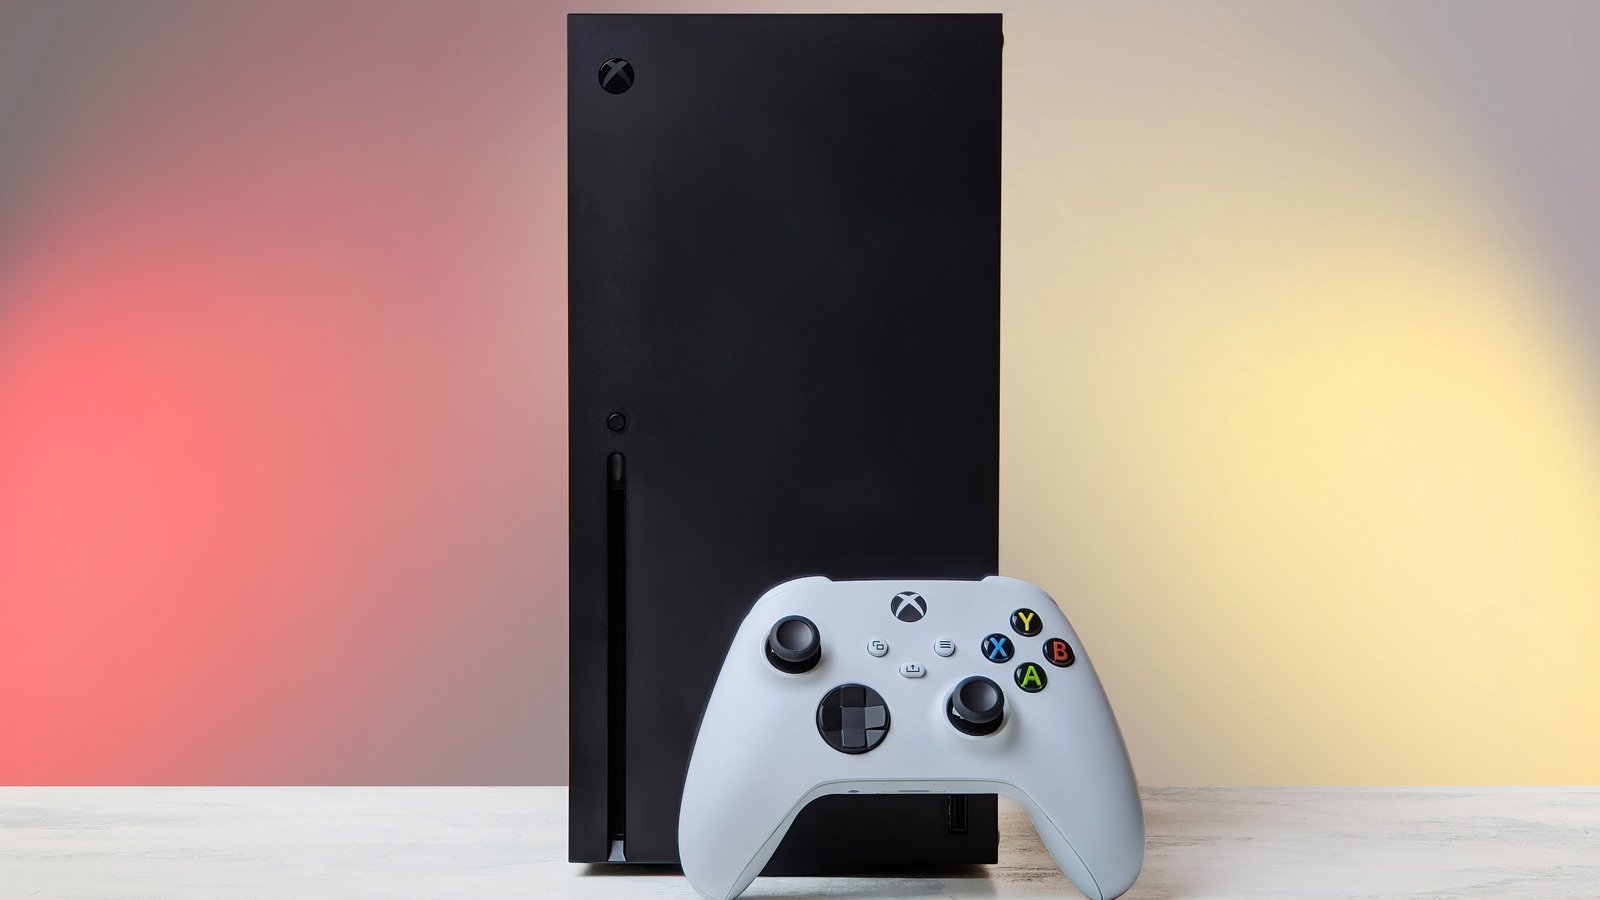 THE WORLD'S LARGEST XBOX SERIES X HAS ARRIVED